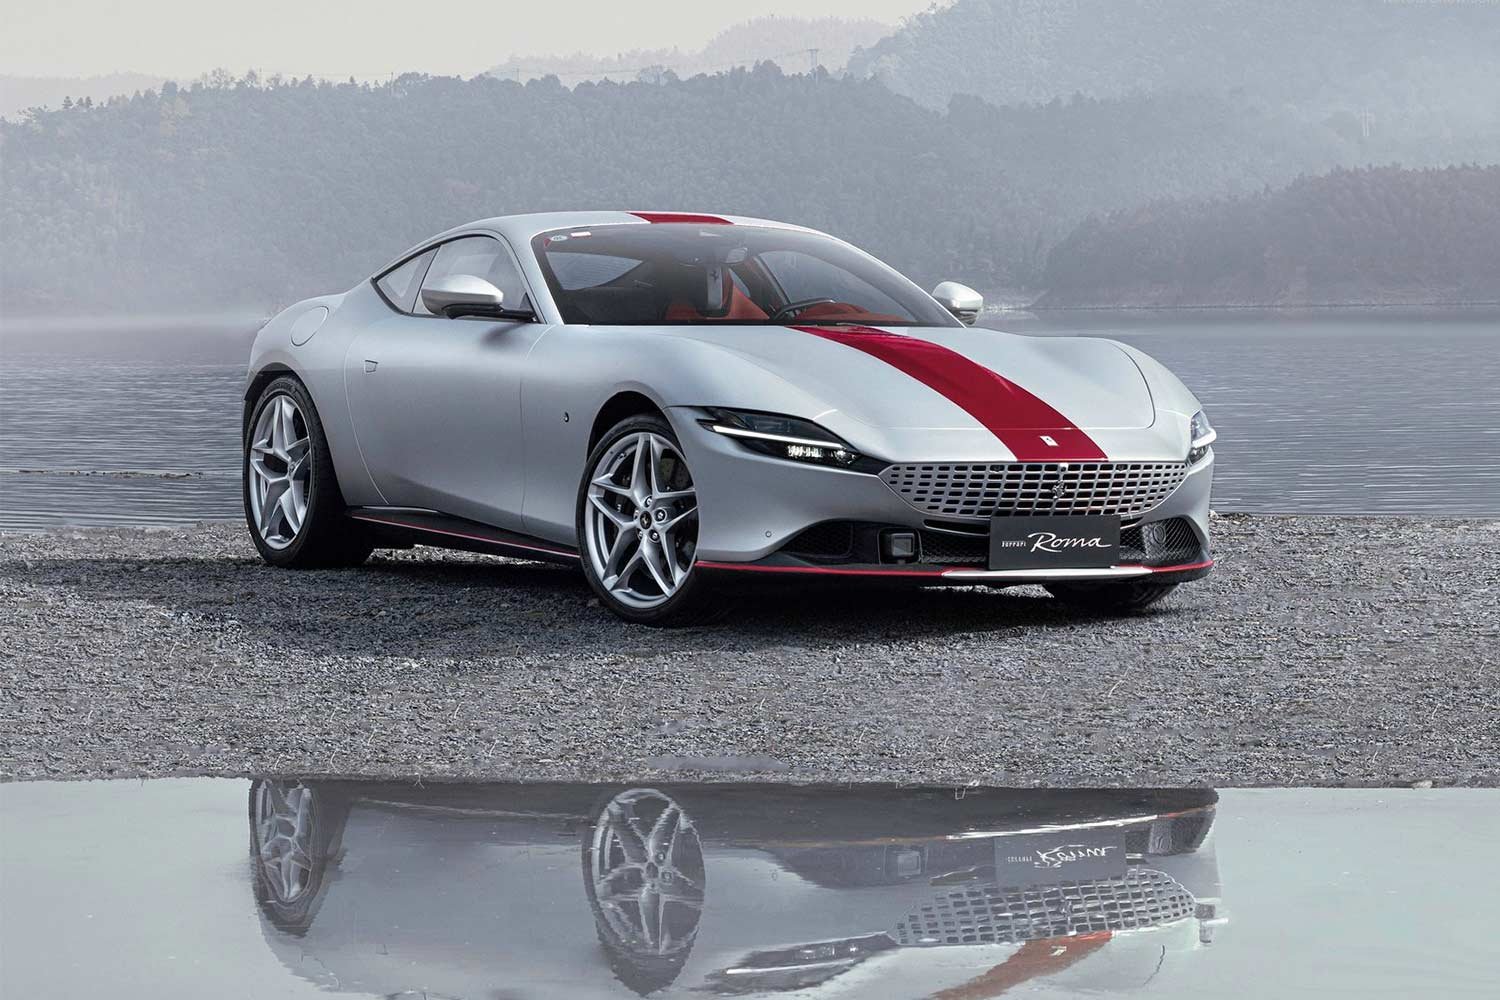 2023 Ferrari Roma Tailor Made China inspired by traditional Chinese  aesthetics and craftsmanship - AUTOBICS